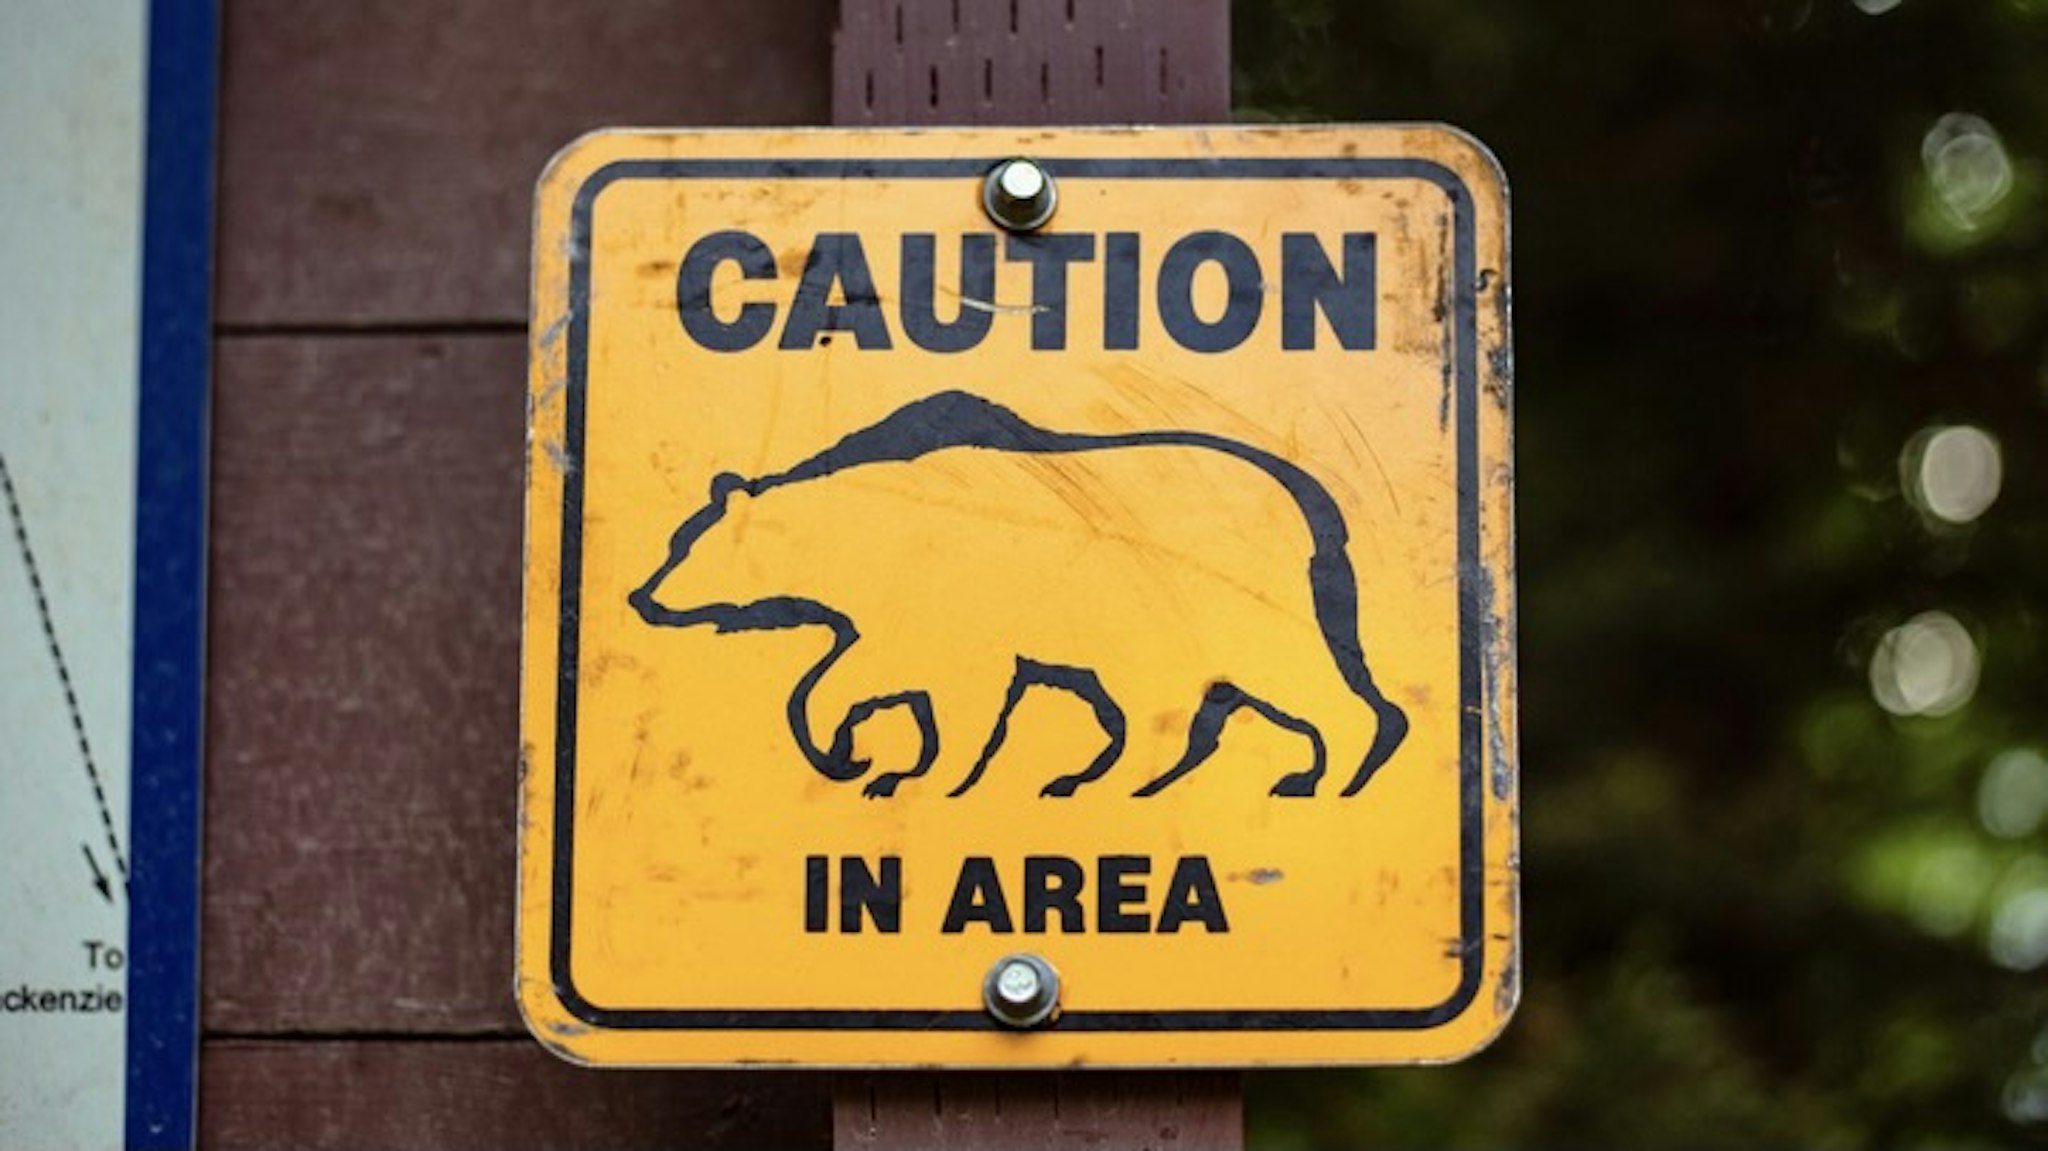 caution sign bear in area - stock photo Yellow warning sign of caution bear in area on park entrance at nature park Katie Wintersgill via Getty Images